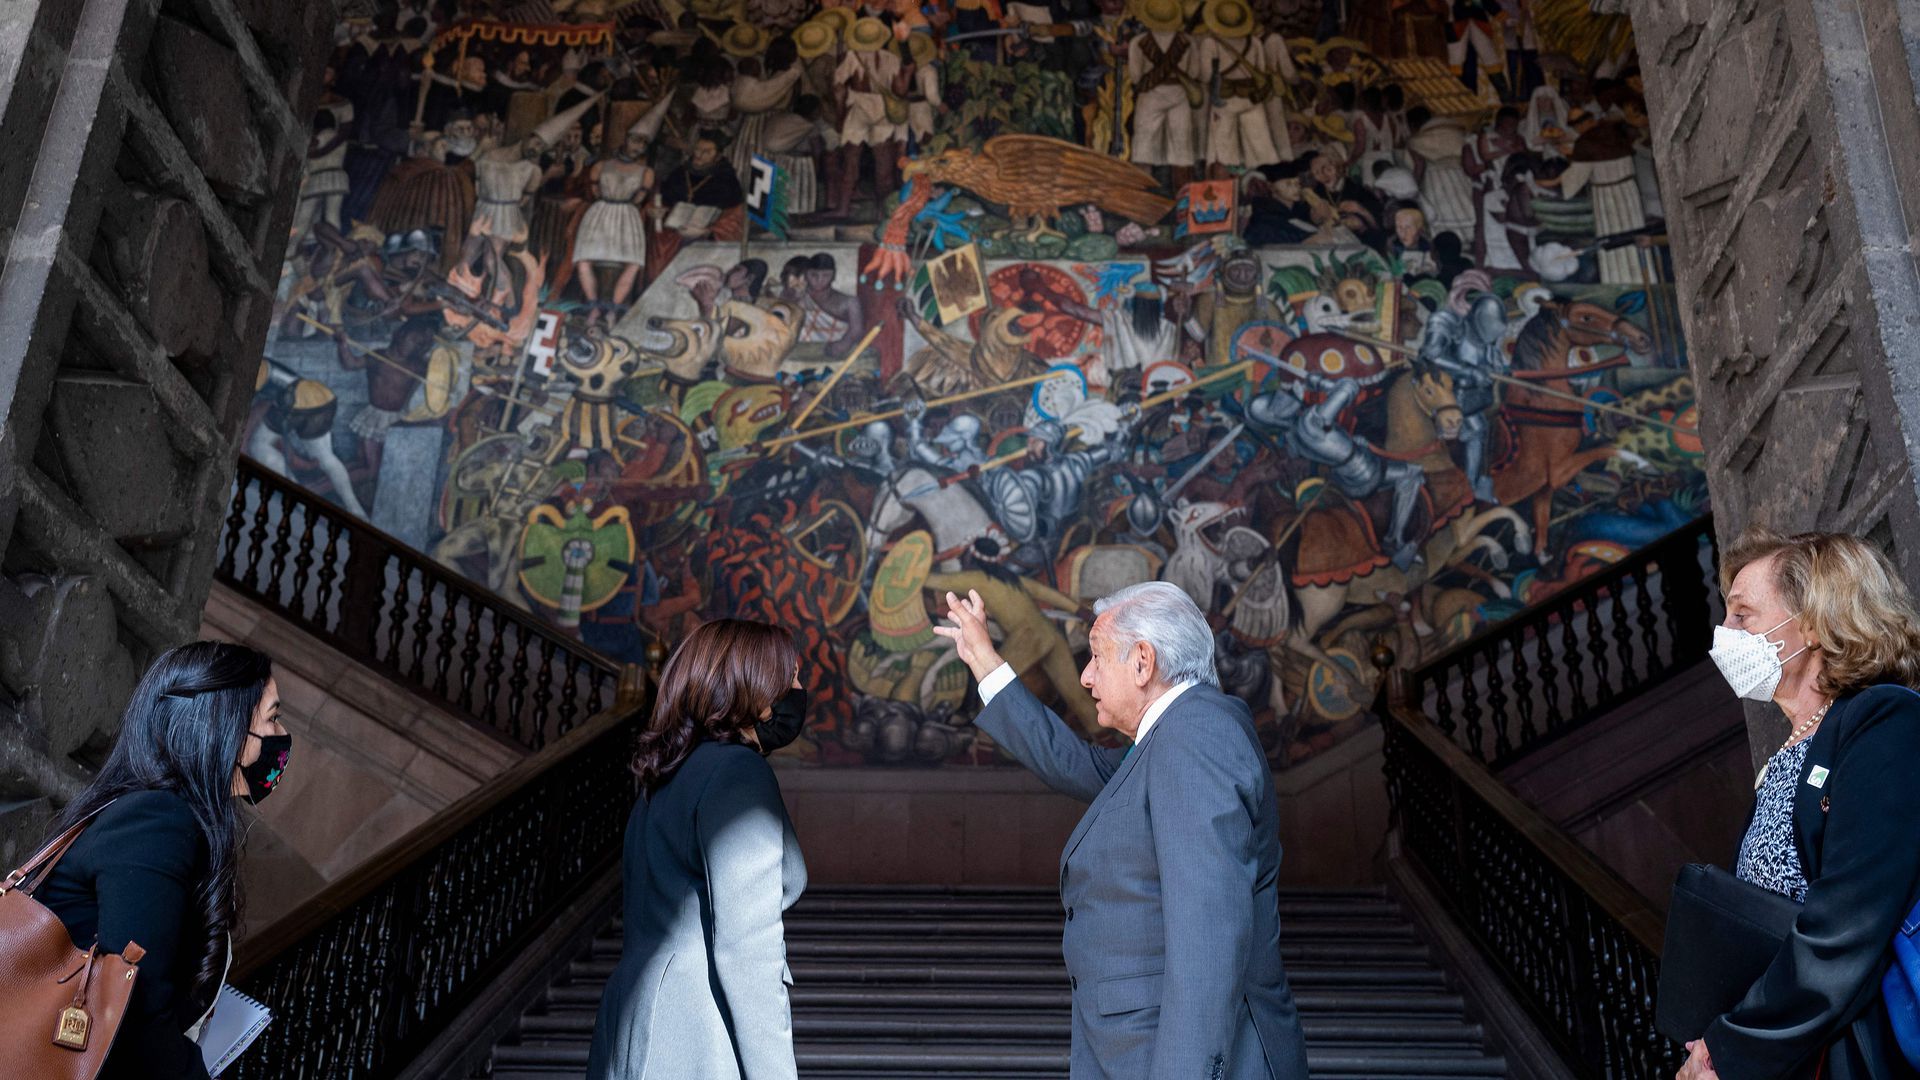 U.S. Vice President Kamala Harris and Mexican President Andrés Manuel López Obrador, with interpreters, before a Rivera mural in Mexico’s National Palace on June 8.